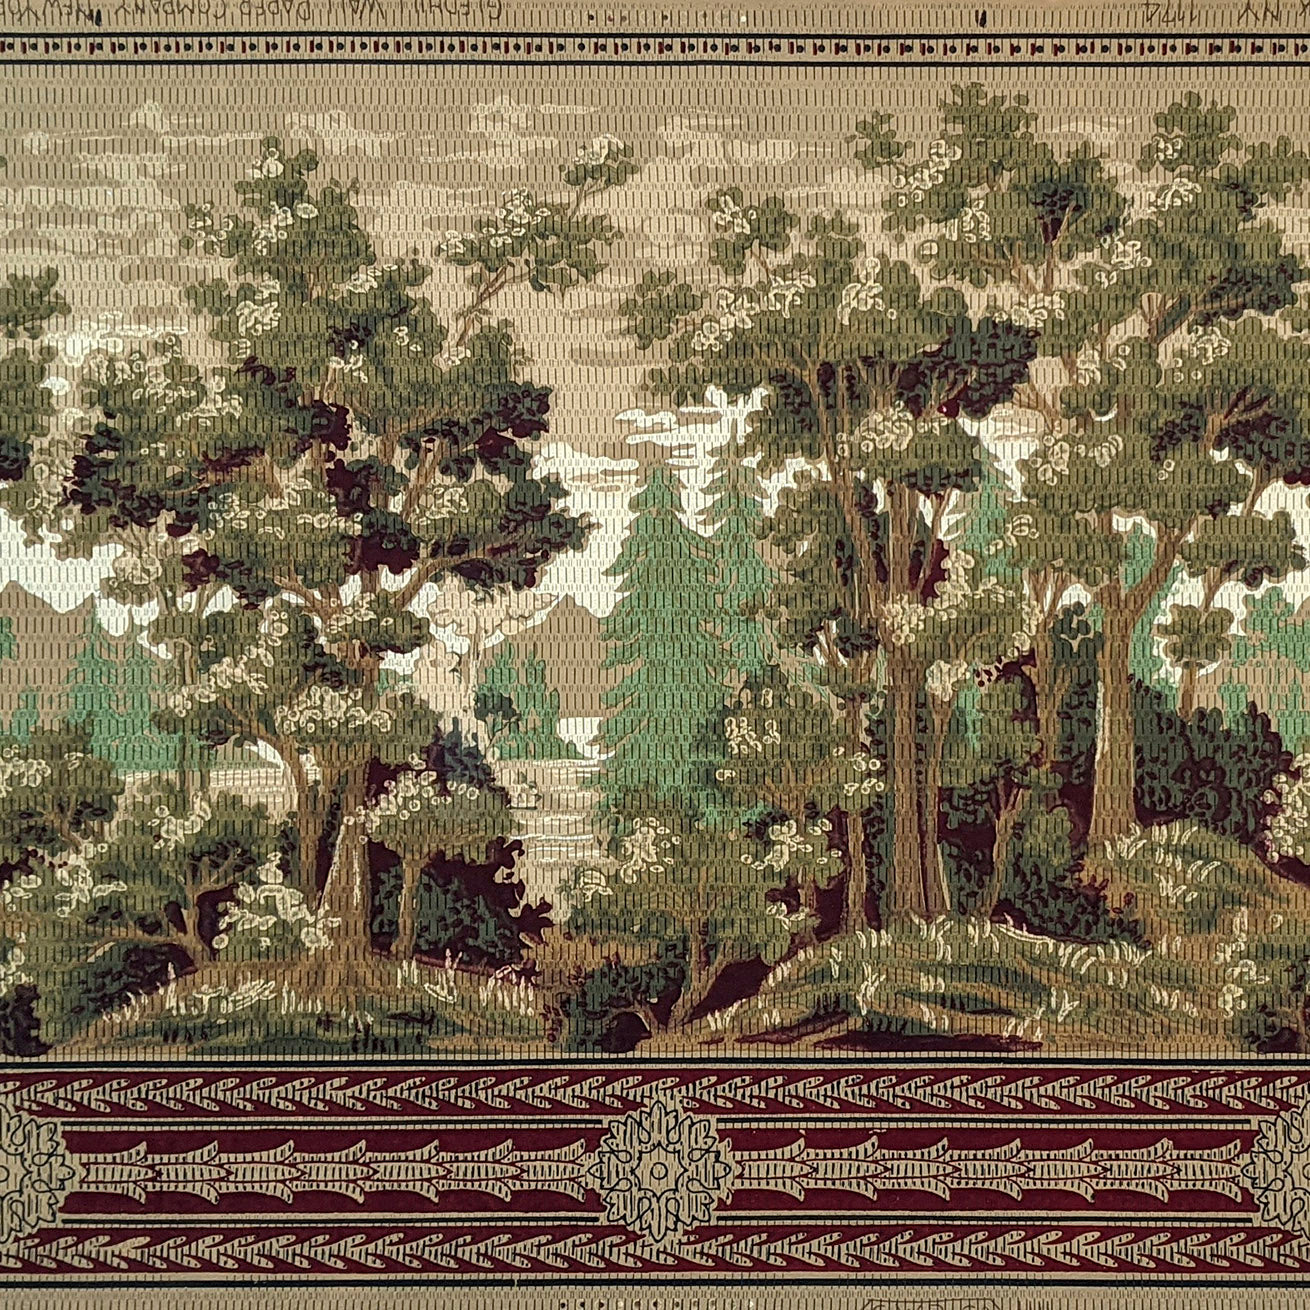 Tapestry Treescape with Lake, Mountain